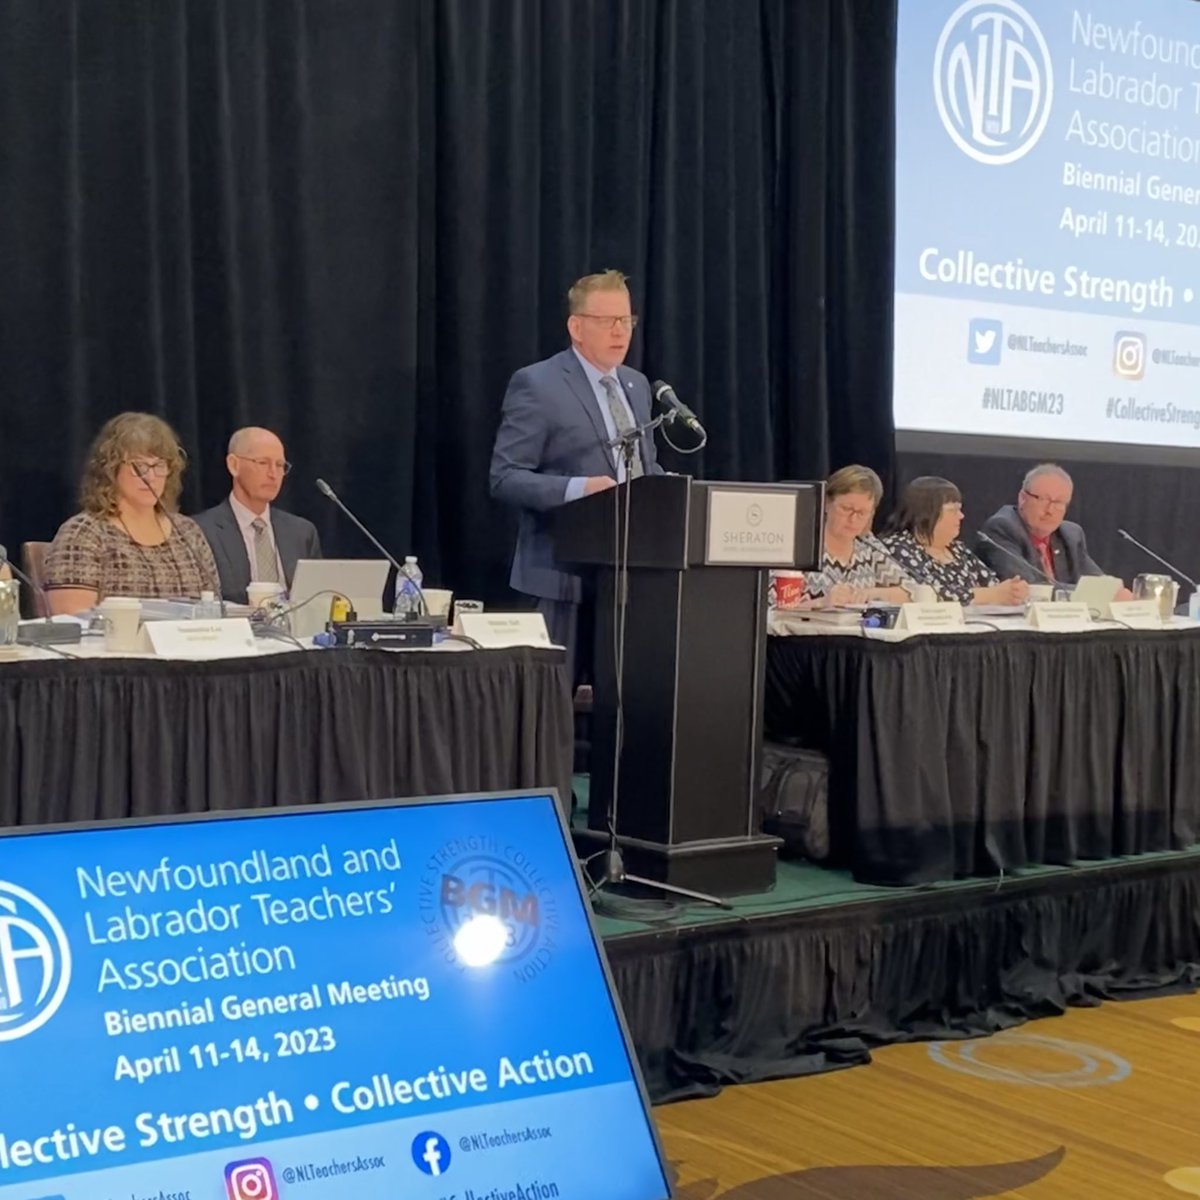 President @TrentLangdonNL begins Day 2 of #NLTABGM23 with a call for teachers to hold @GovNL accountable for its lack of clear vision when it comes to public education and push for action now. #CollectiveStrength #CollectiveAction